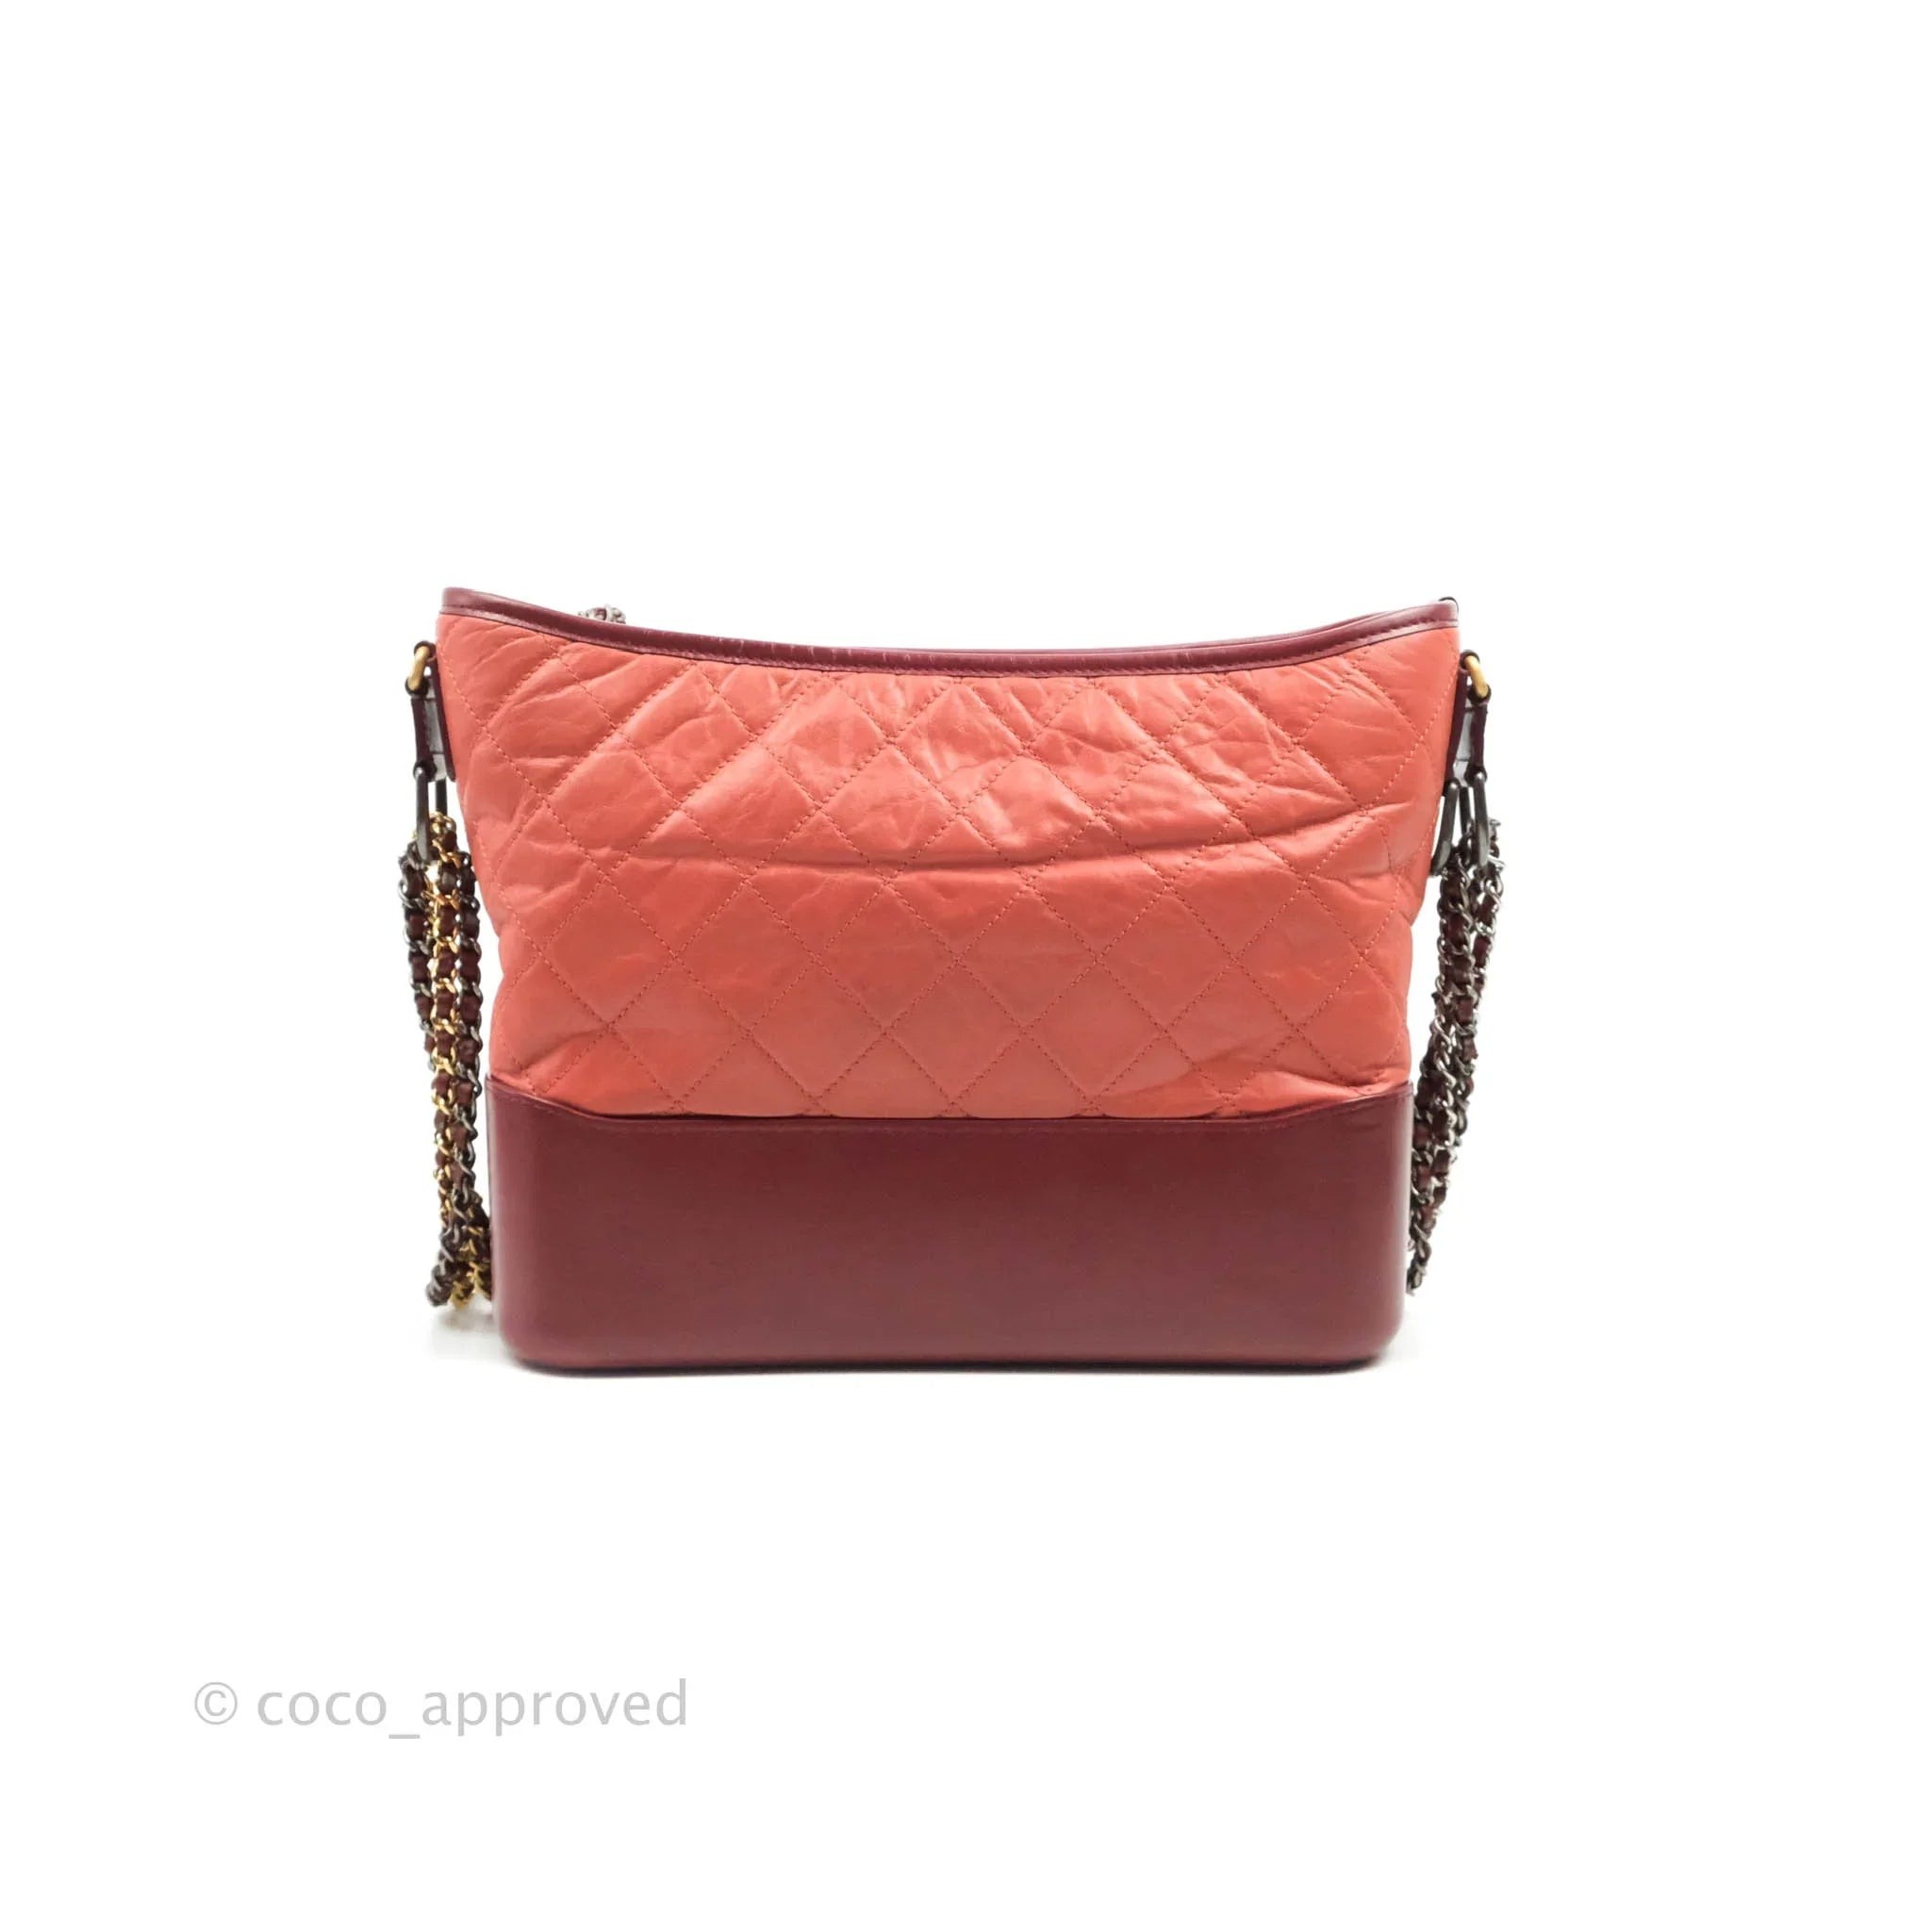 Chanel Gabrielle Large Hobo Bag - Red/Pink